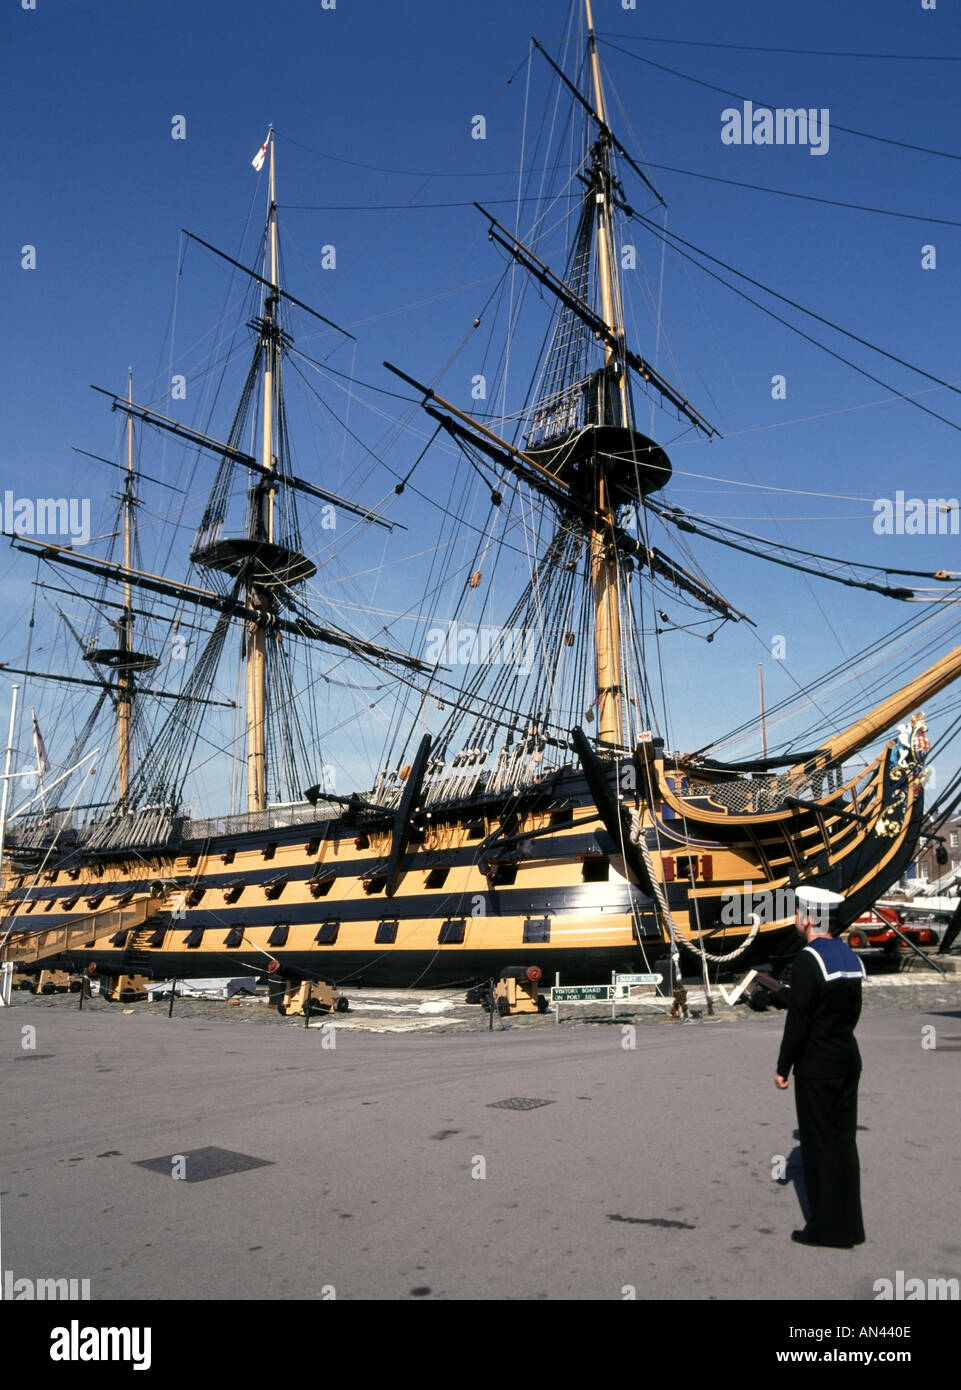 Portsmouth historic naval dockyard preserved HMS Victory Admiral Horatio Nelsons flagship at Battle of Trafalgar with sailor in uniform Hampshire UK Stock Photo